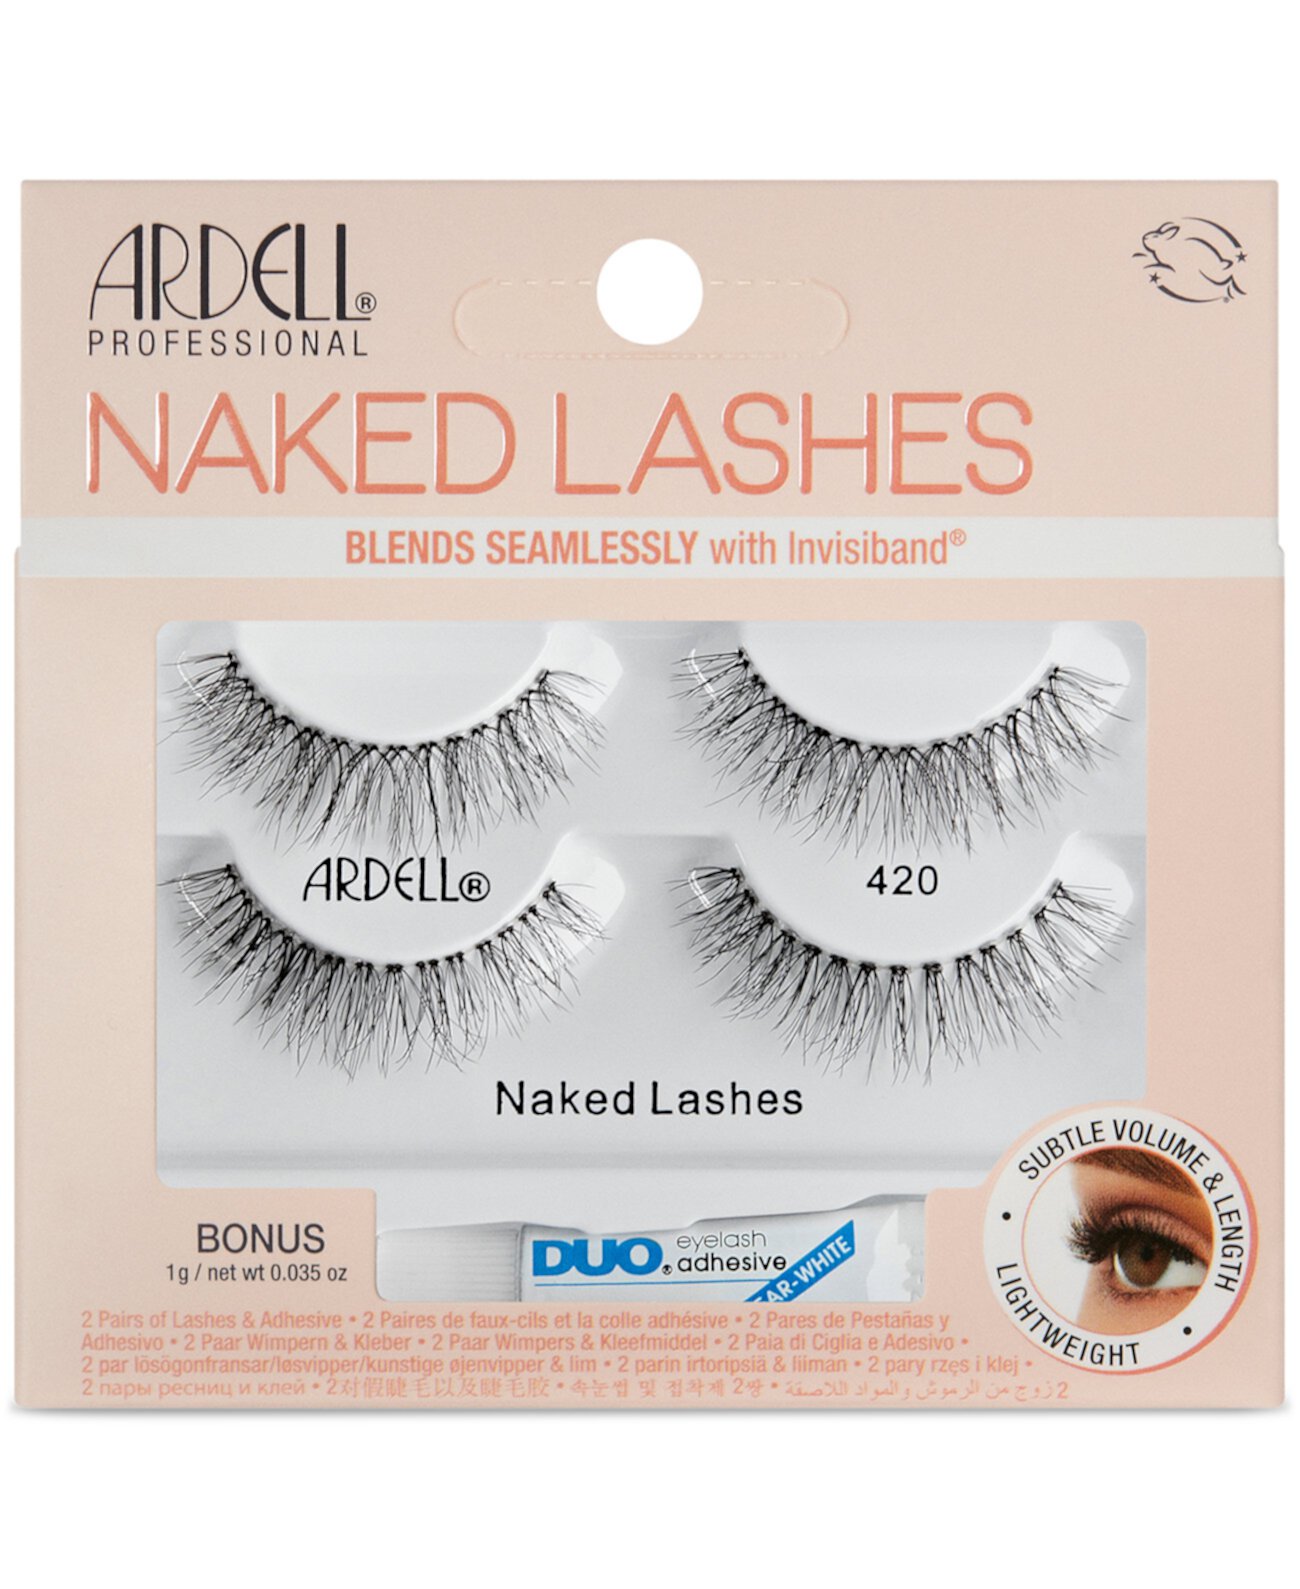 Naked Lashes #420 - 2 Pairs ARDELL